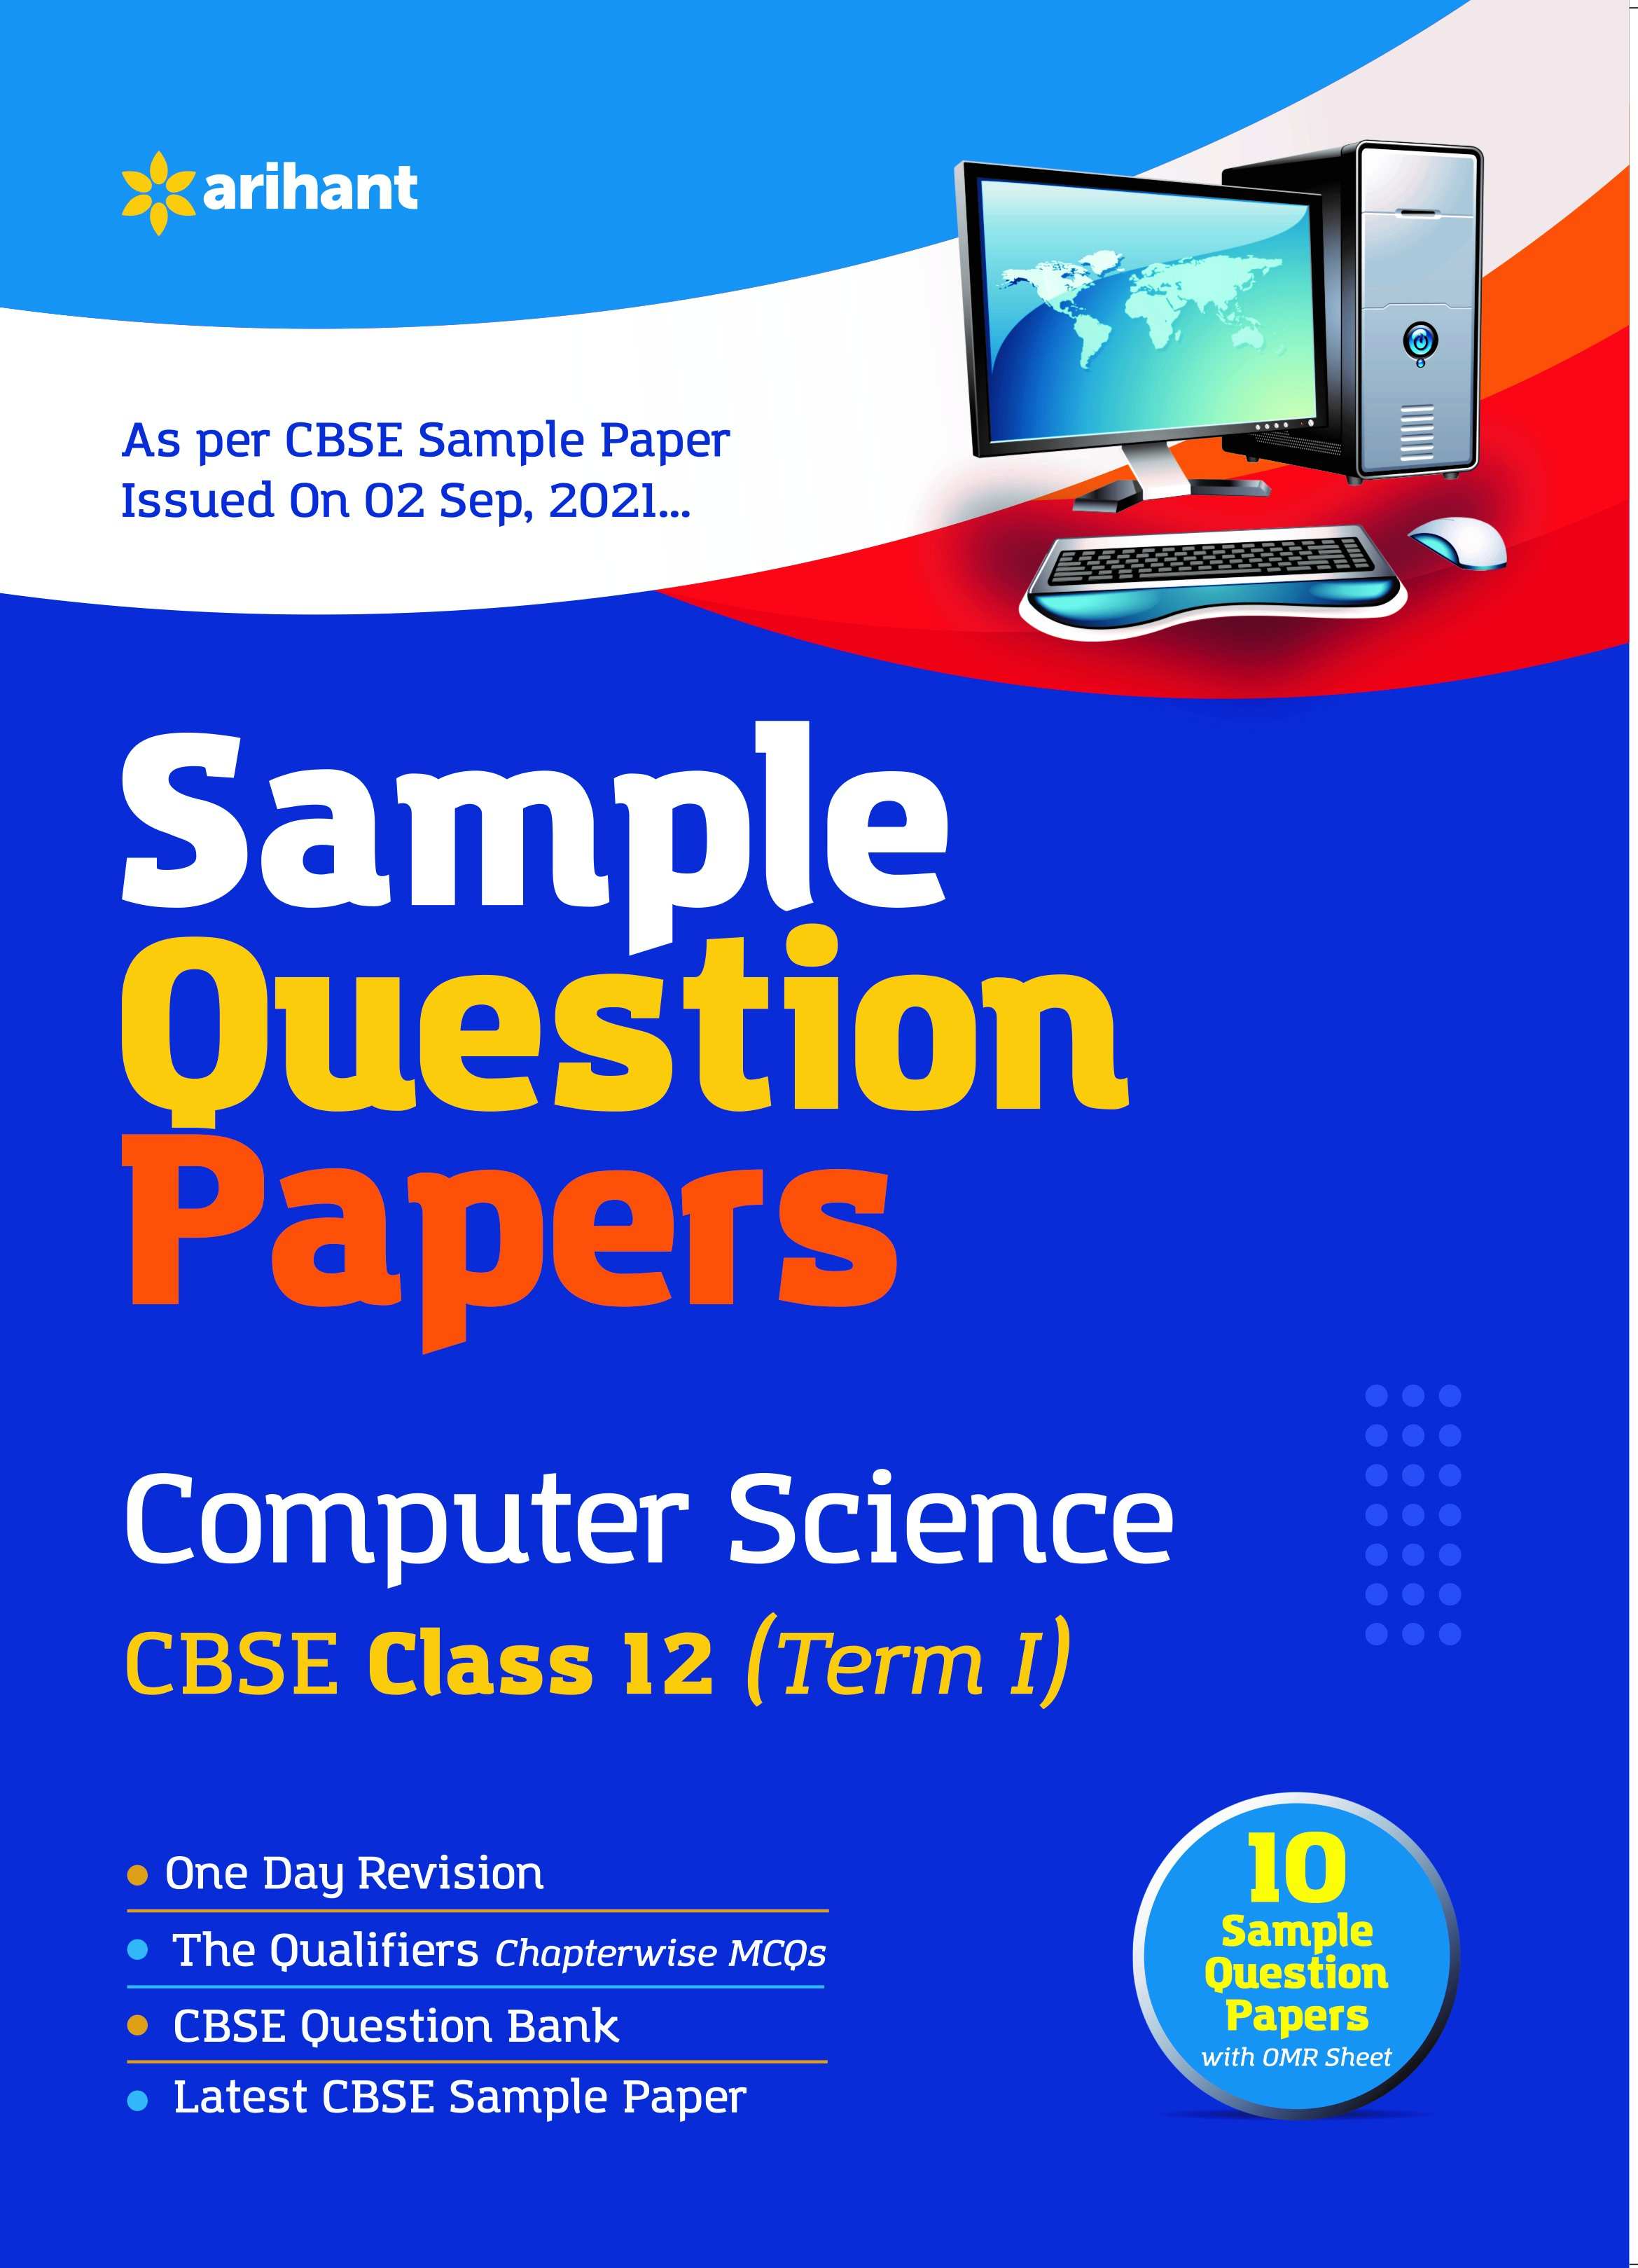 Arihant CBSE Term 1 Computer Science Sample Papers Questions for Class 12 MCQ Books for 2021 (As Per CBSE Sample Papers issued on 2 Sep 2021)